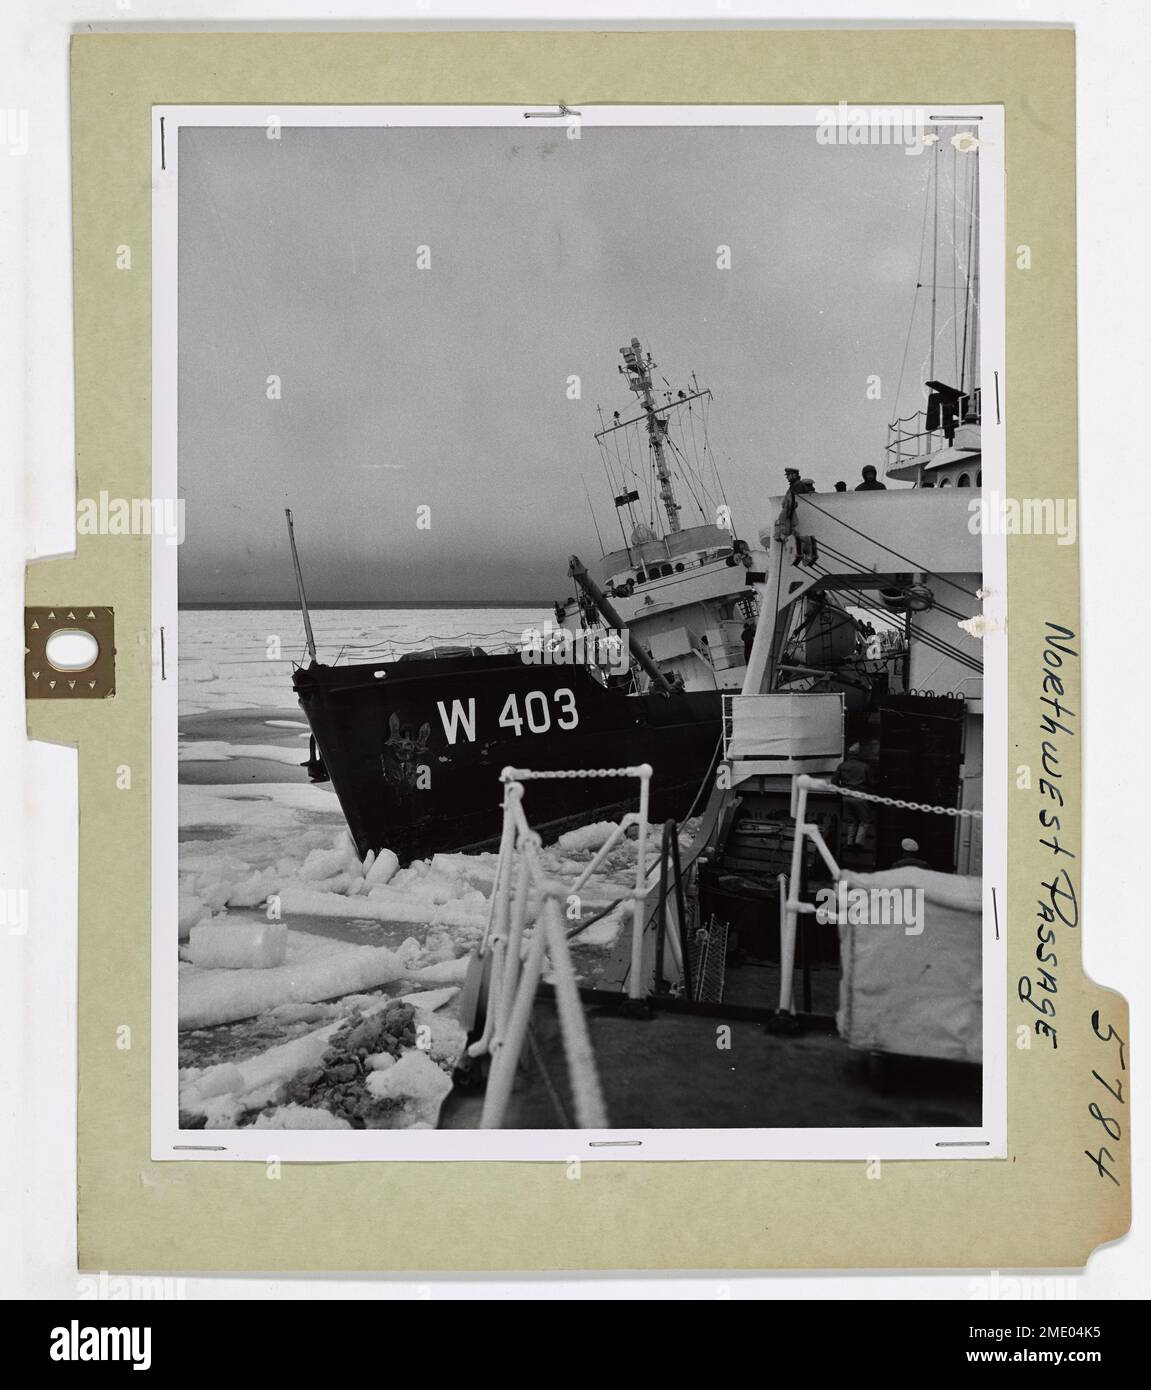 Northwest Passage. The power of Arctic ice created a few tense moments when it forced the U.S. Coast Guard buoy tender SPAR (WAGL-403) close to the Coast Guard icebreaker Storis. Both locked in ice in Amundsen Gulf, the ships battled strong winds and ice pressure (August 1957). Smart seamanship prevented serious damage, though later underwater inspection in clear waters revealed the furious north had scored. Ice had sheared a blade of the ship's crew. Breaking out from the icey grip the Spar and Storis, accompanied by a third Coast Guard ship, the Bramble continued to James Ross Strait and the Stock Photo